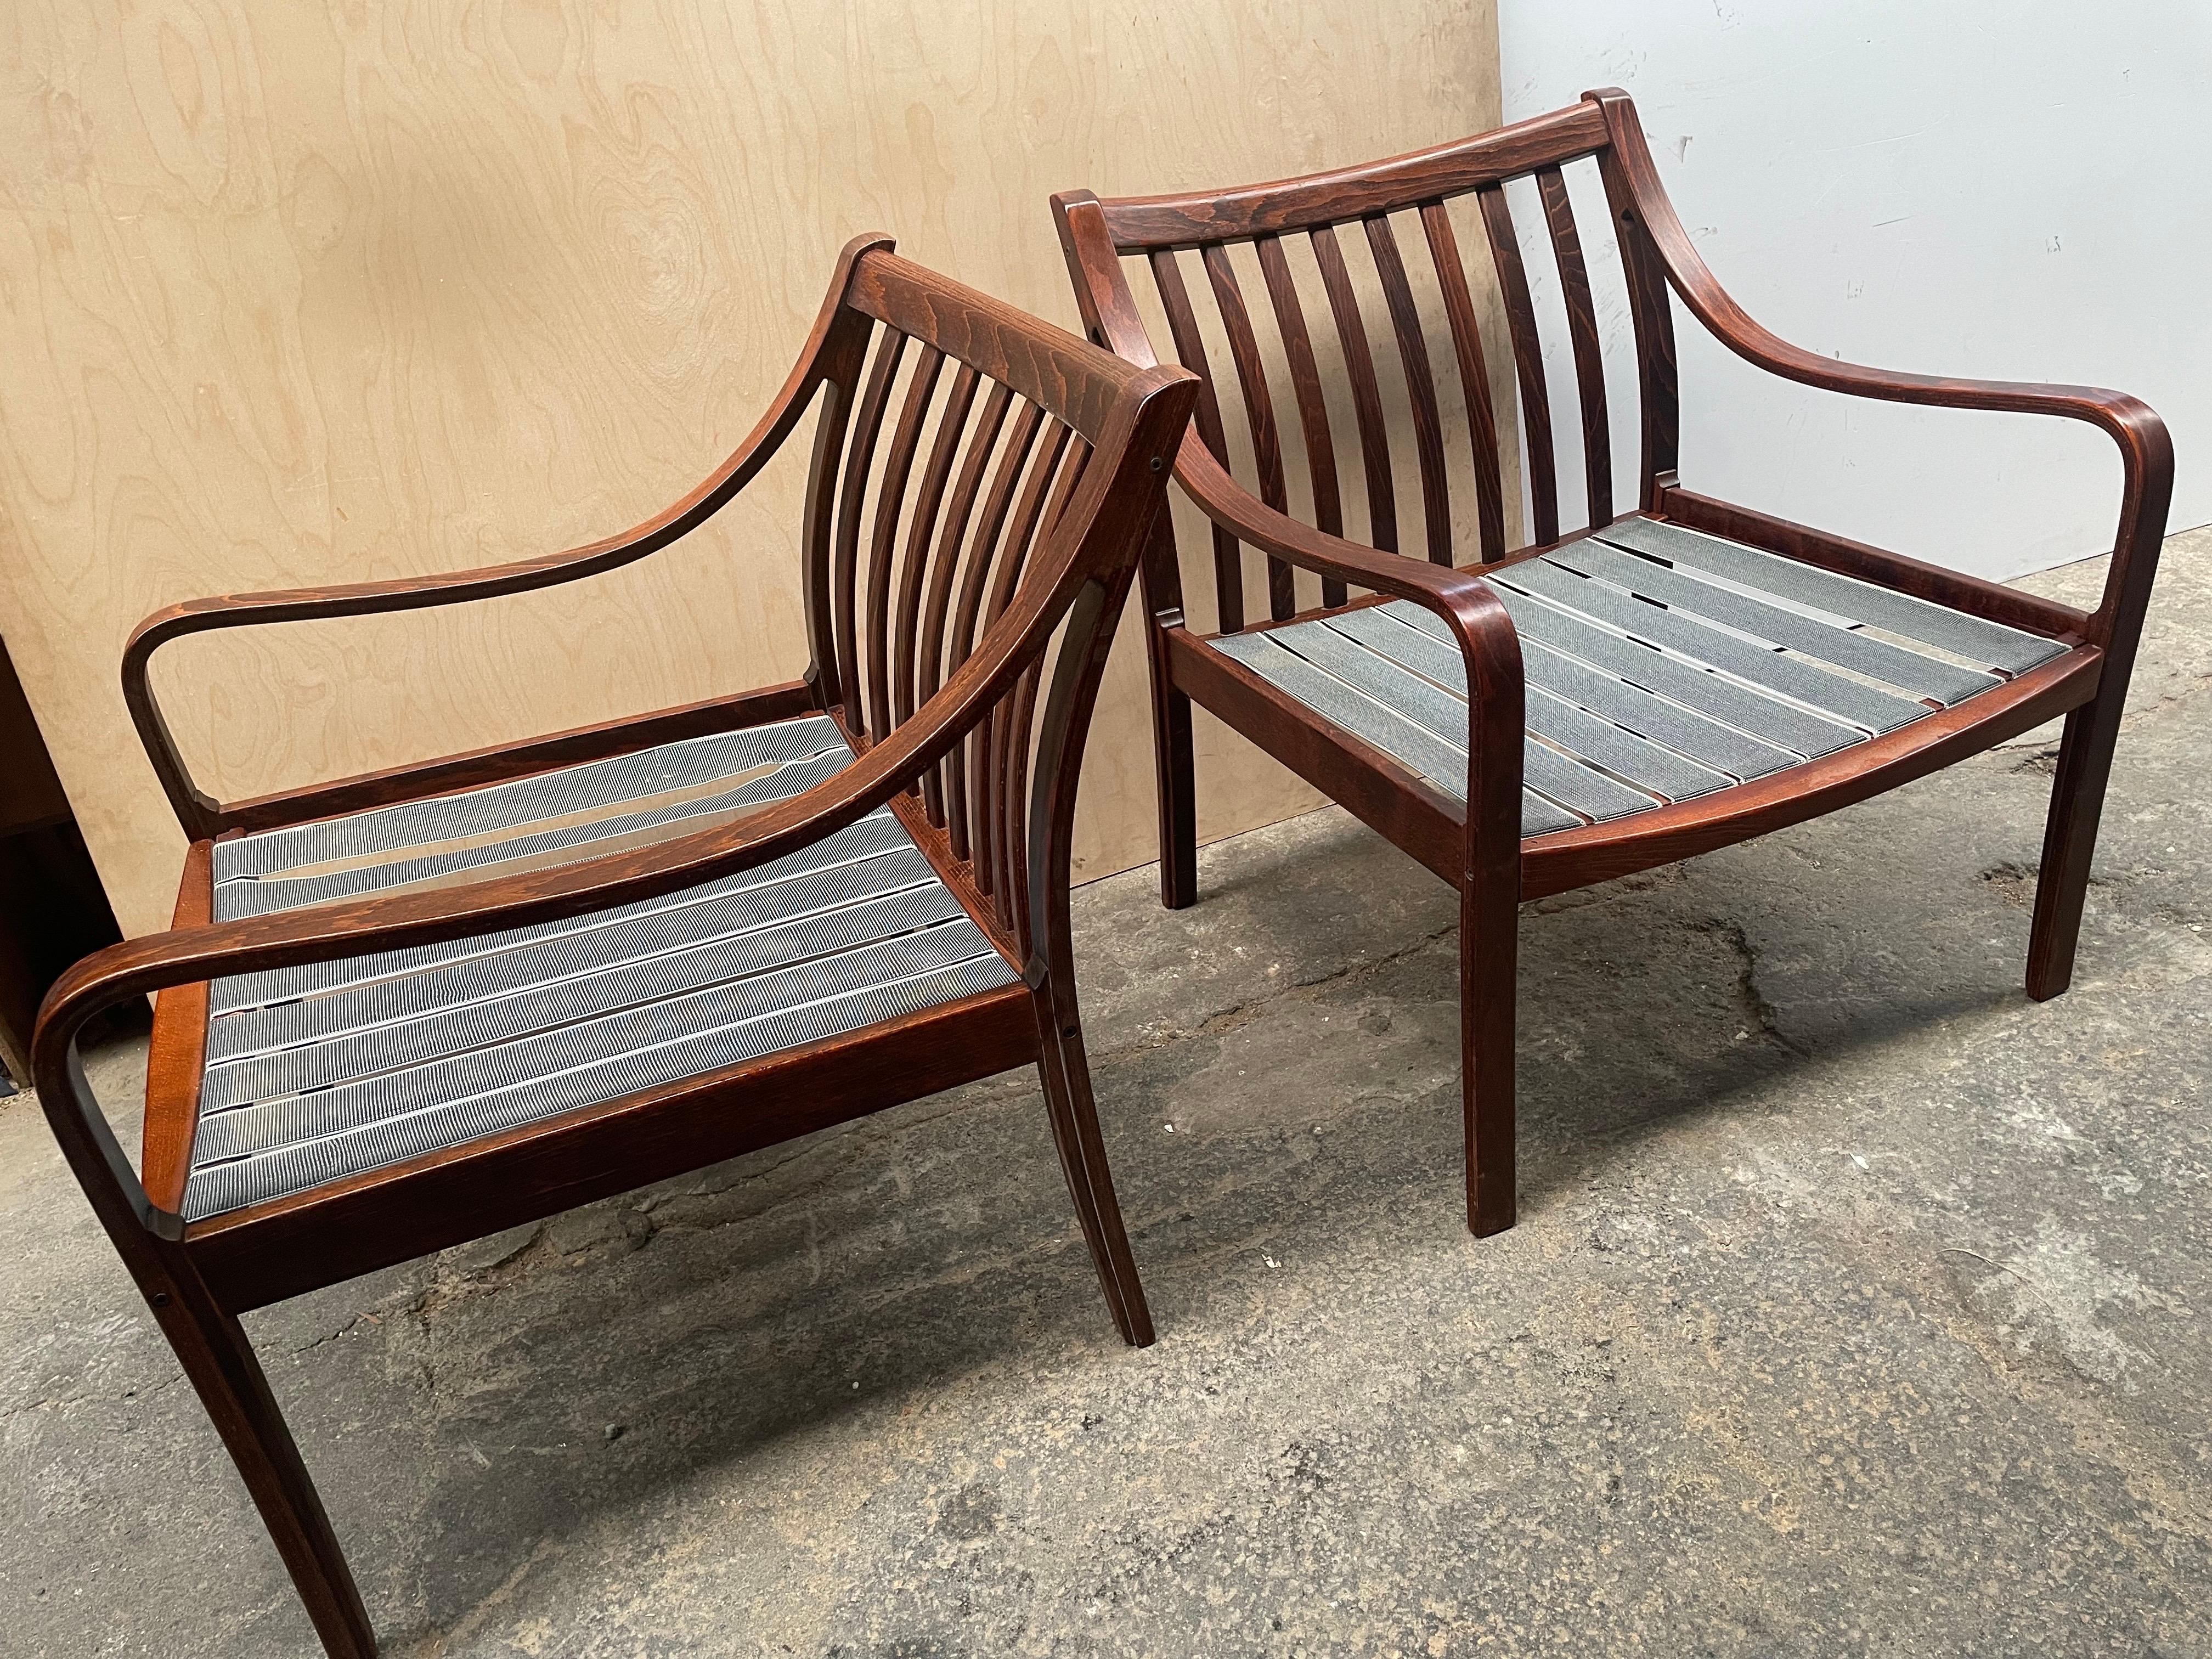 Pair of Lounge Chairs by Fredrik Kayser for Vatne Møbler, 1960s For Sale 1